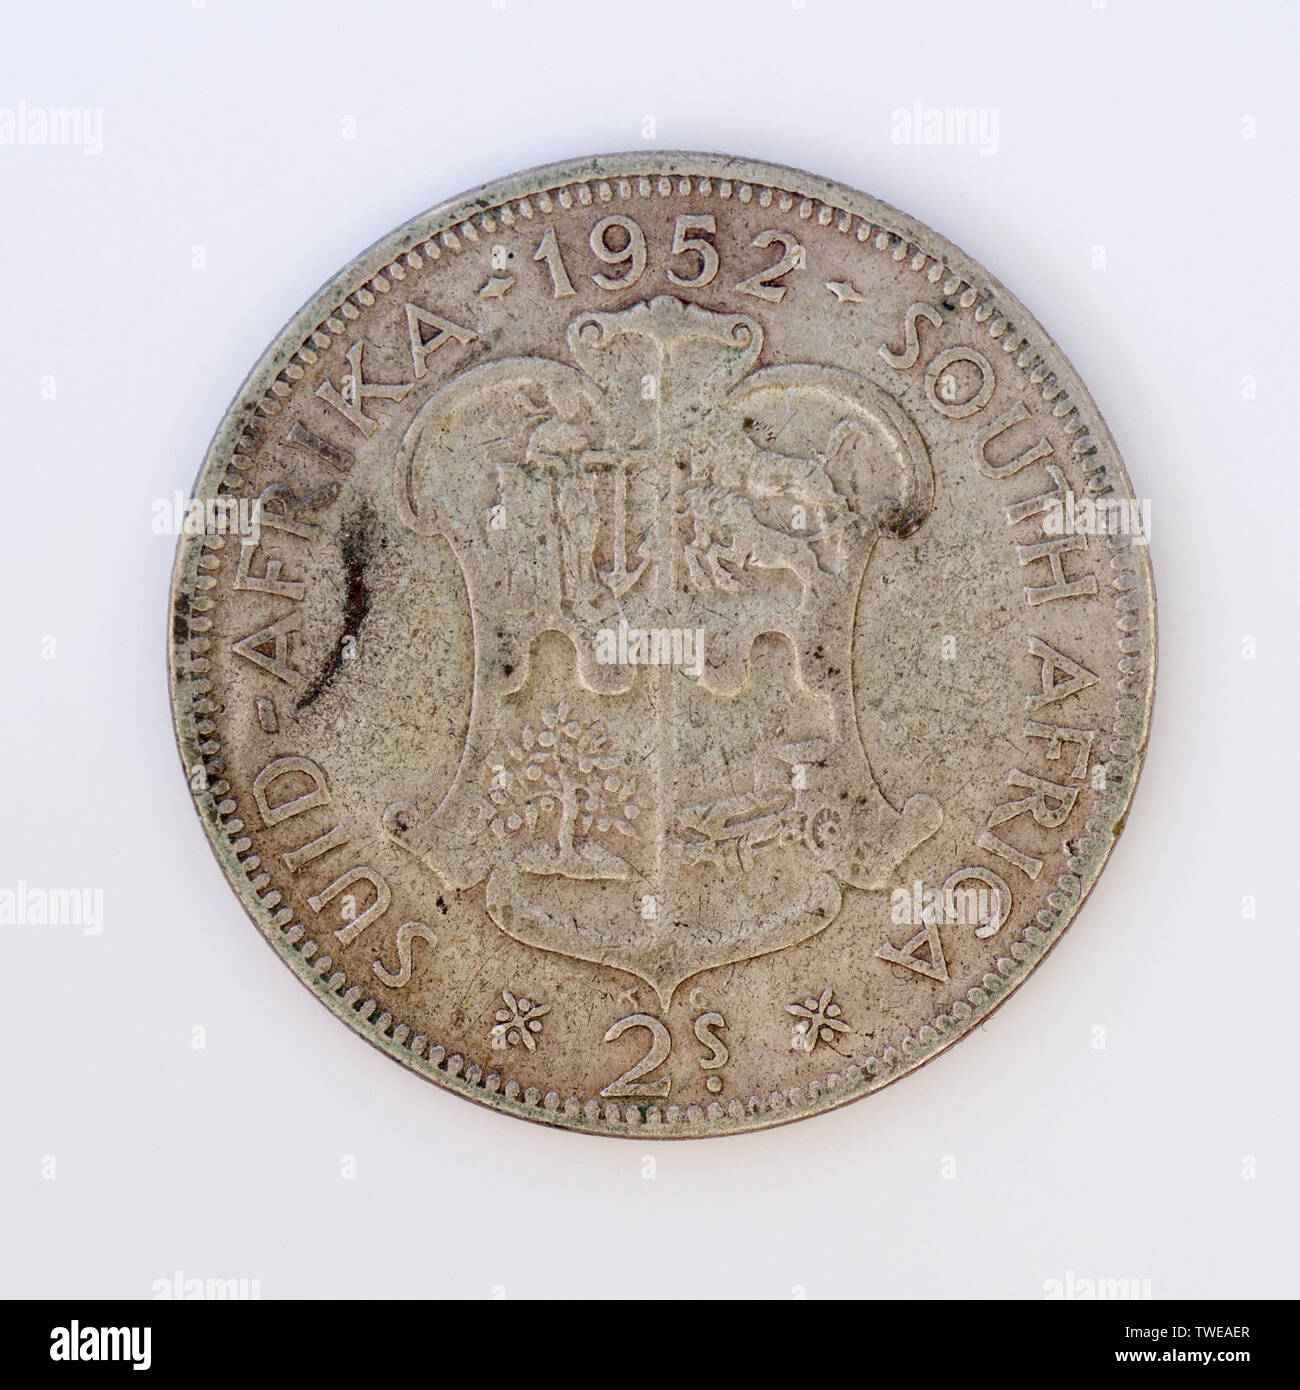 South Africa 2 Shillings - George VI Coin - 1952 Stock Photo